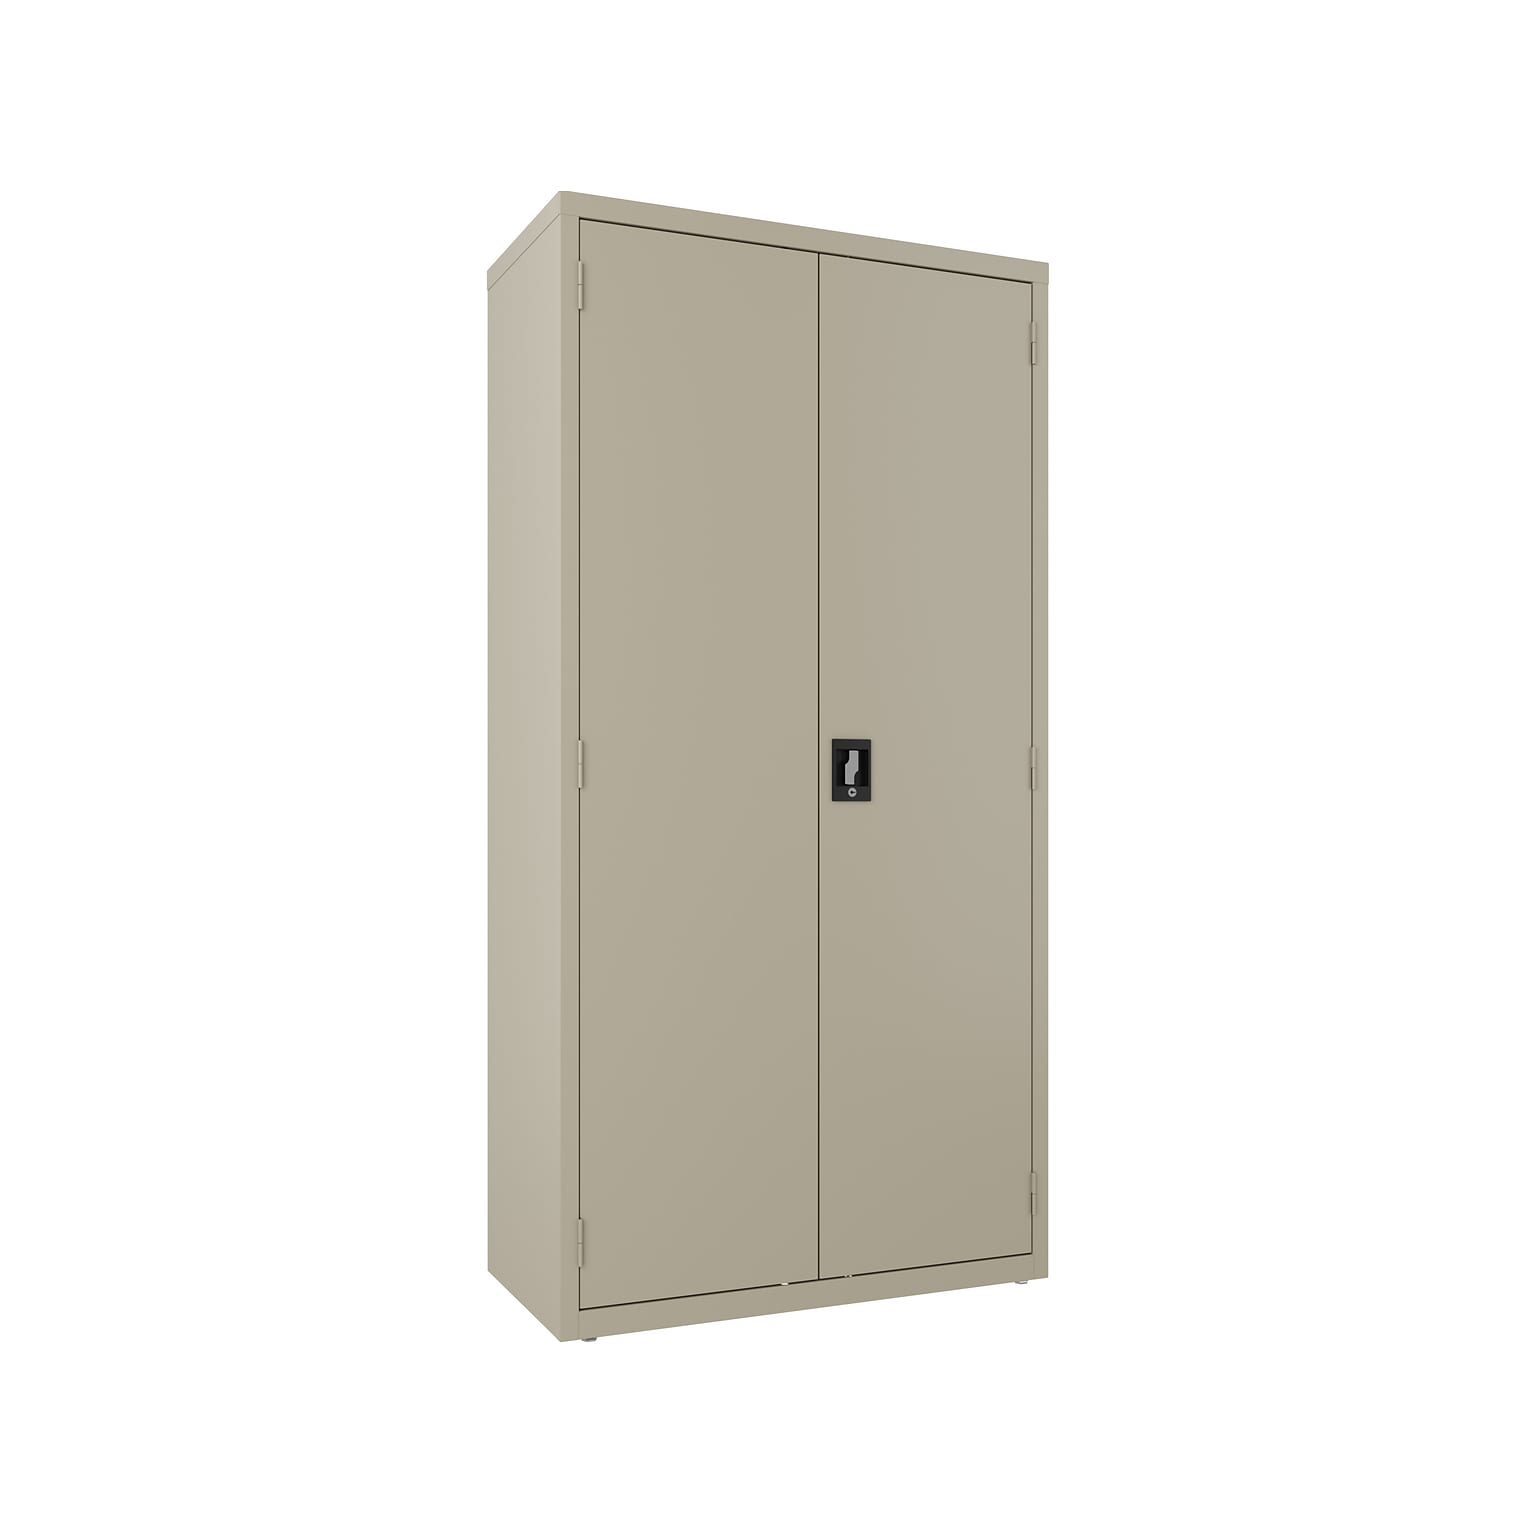 Hirsh 72 Steel Wardrobe Cabinet with 4 Shelves, Putty (22631)